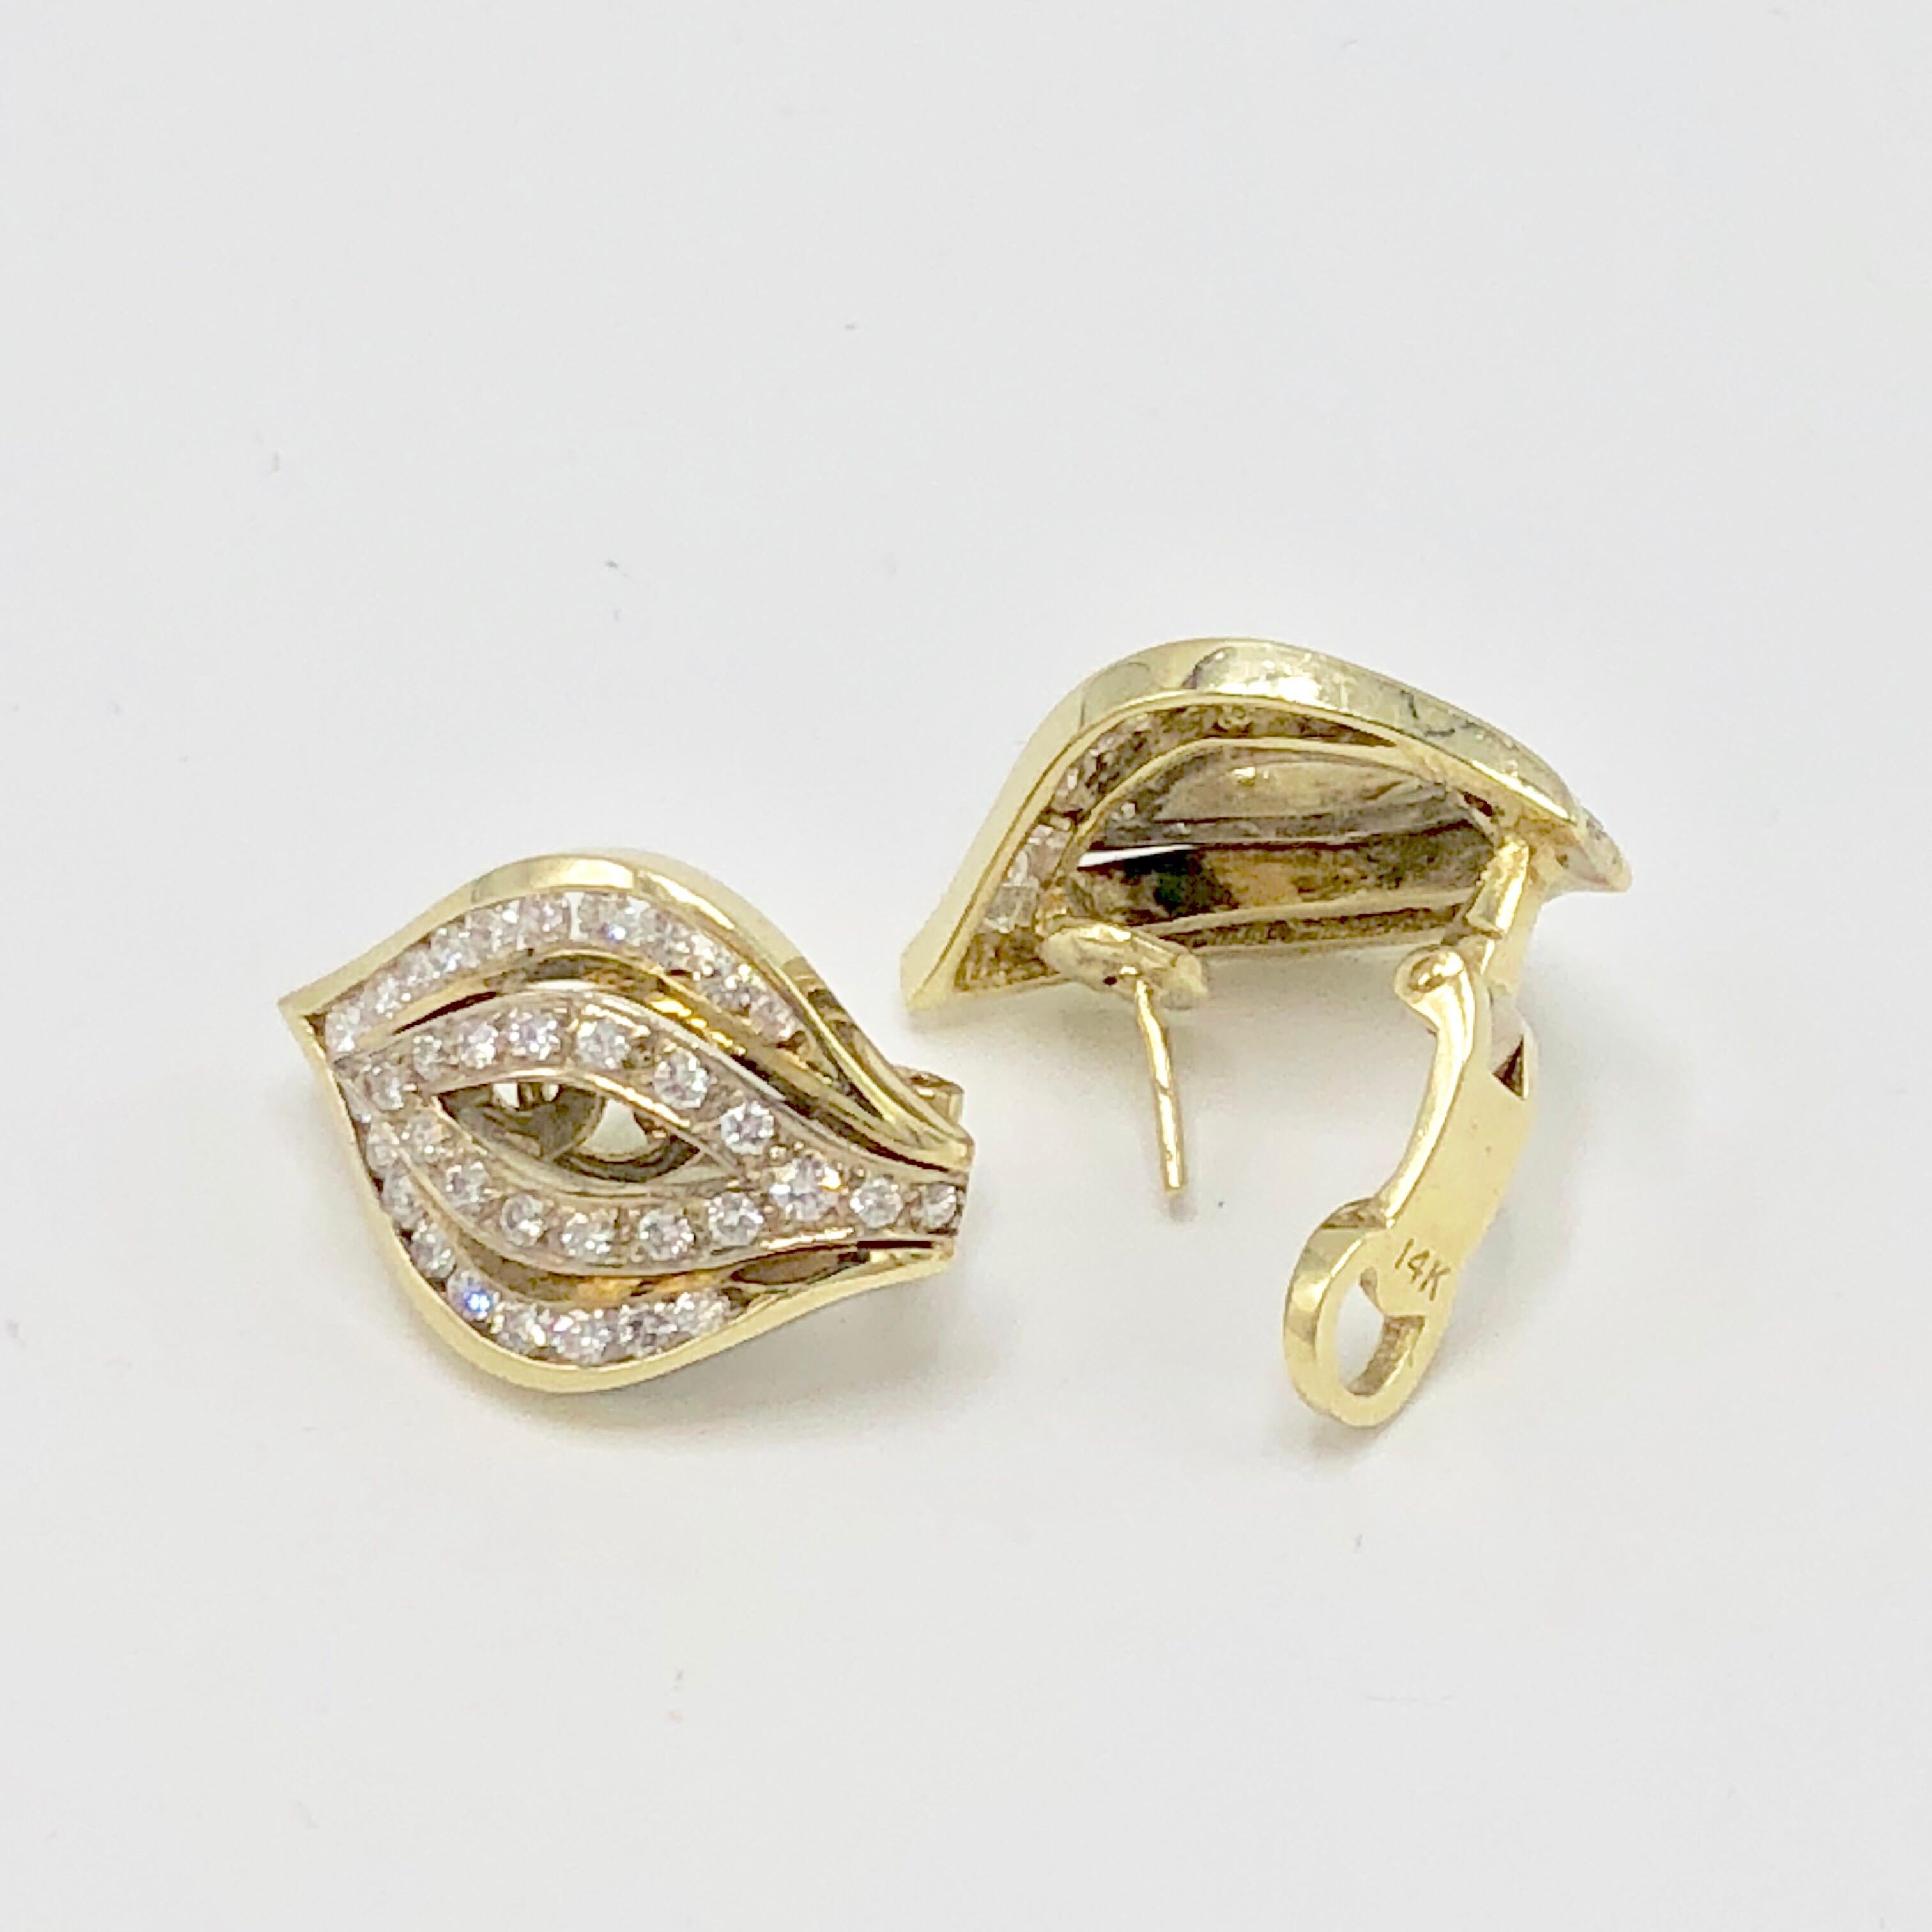 Round Cut White and Yellow Gold Chevron Earrings with Diamonds